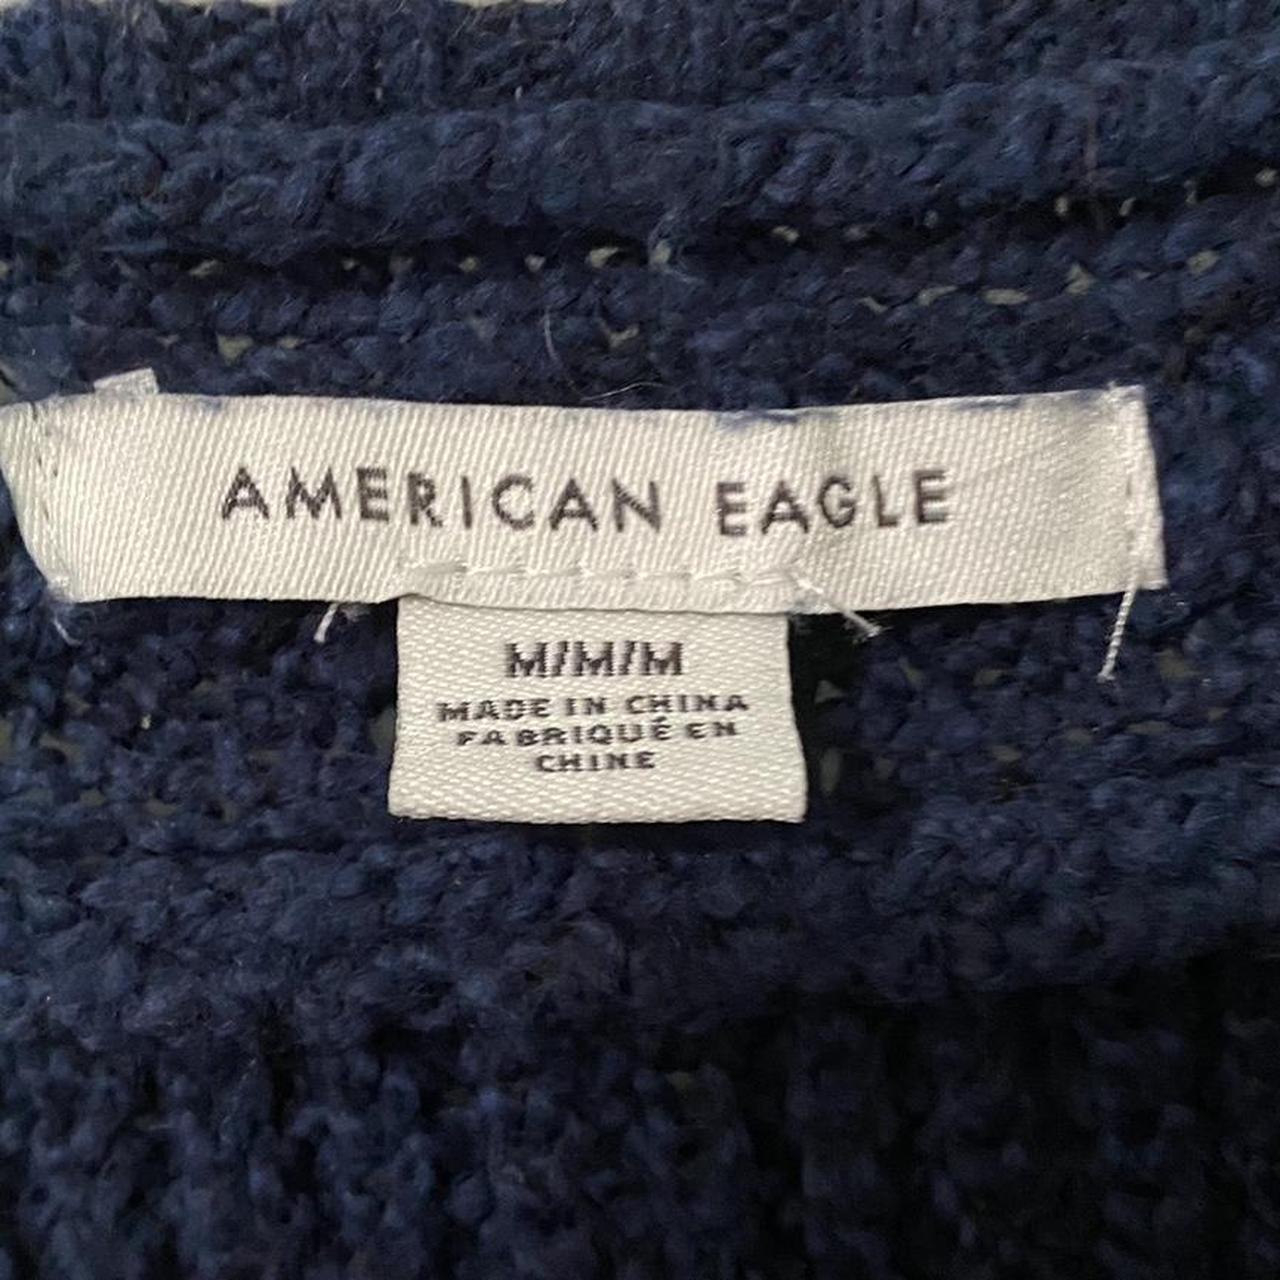 American Eagle Women's White and Navy Jumper | Depop